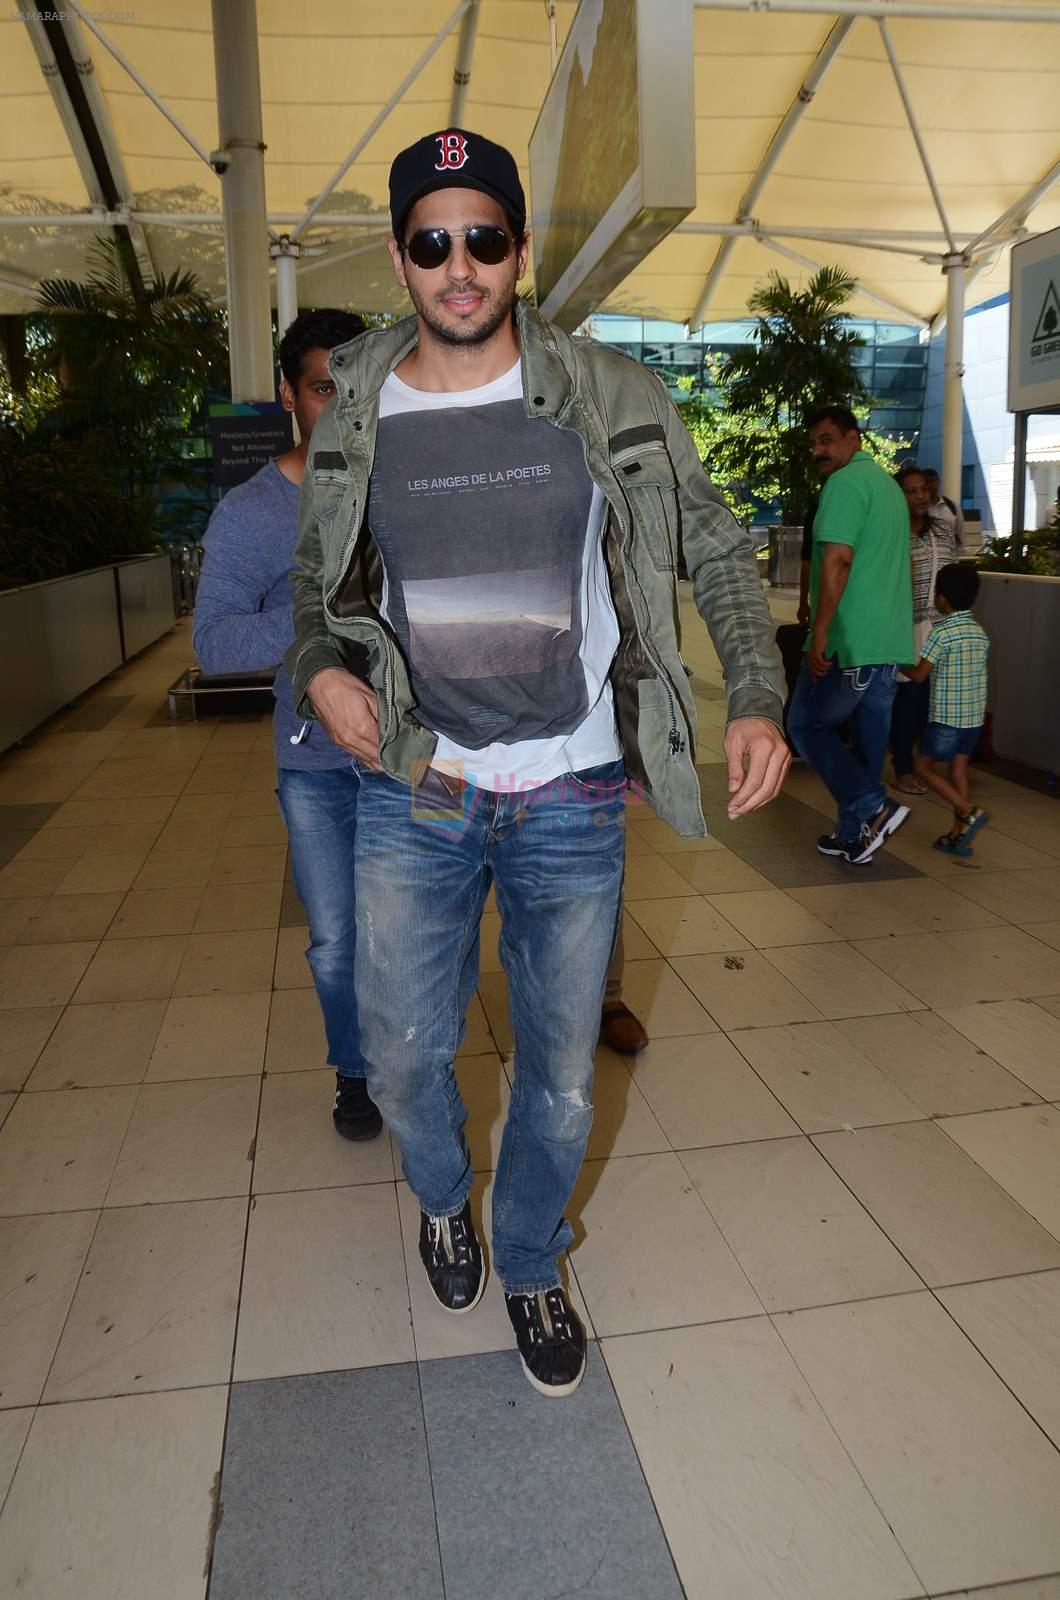 Sidharth Malhotra snapped in Mumbai Airport on 10th June 2015